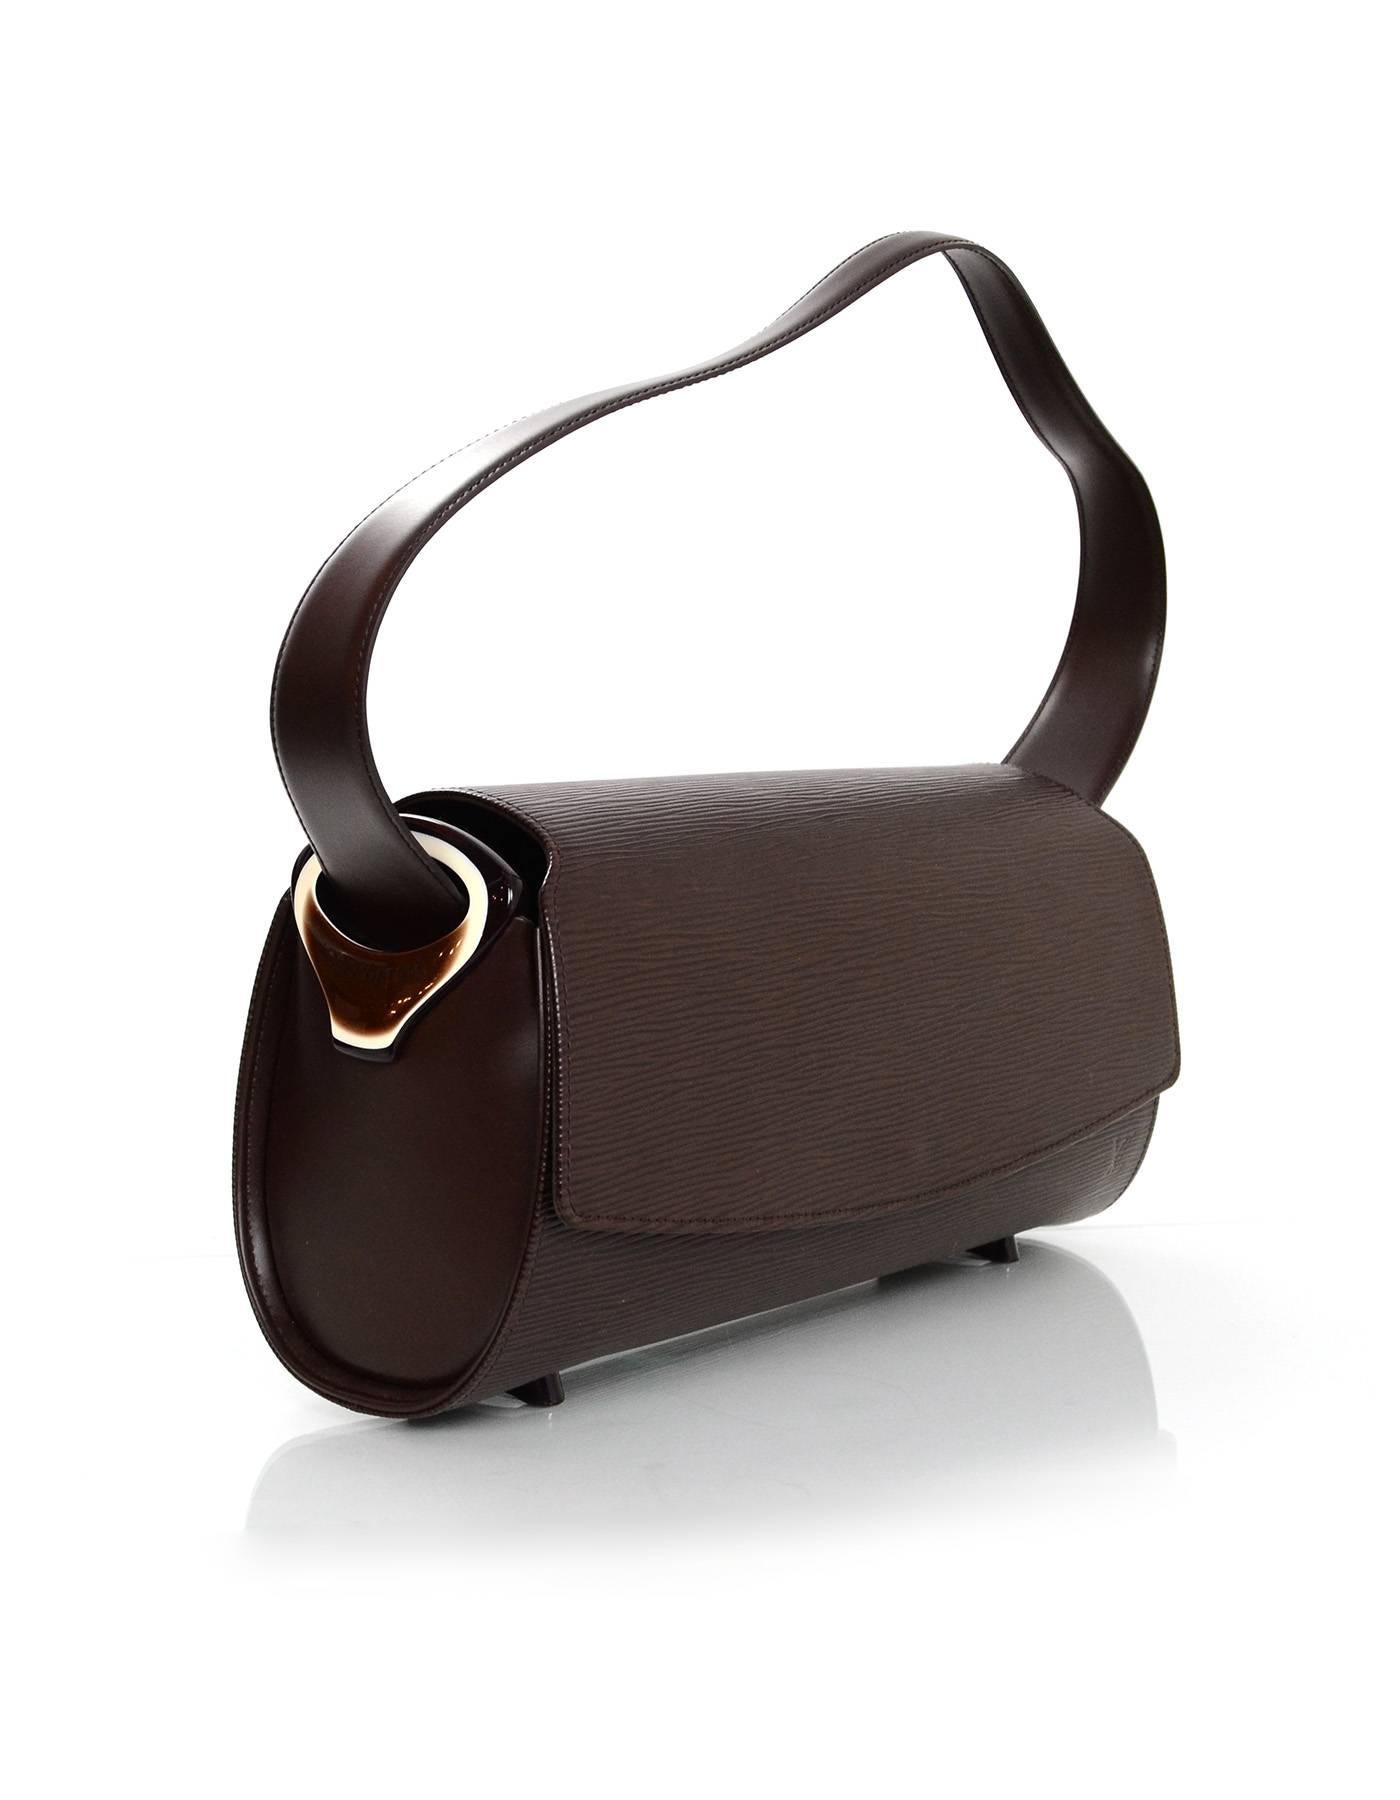 Louis Vuitton Epi Moka Nocturne Shoulder Bag
Features resin details on side panels of bag

Made In: France
Year of Production: 2001
Color: Brown 
Hardware: Goldtone
Materials: Epi leather and smooth leather
Lining: Brown micro fiber
Closure/Opening: